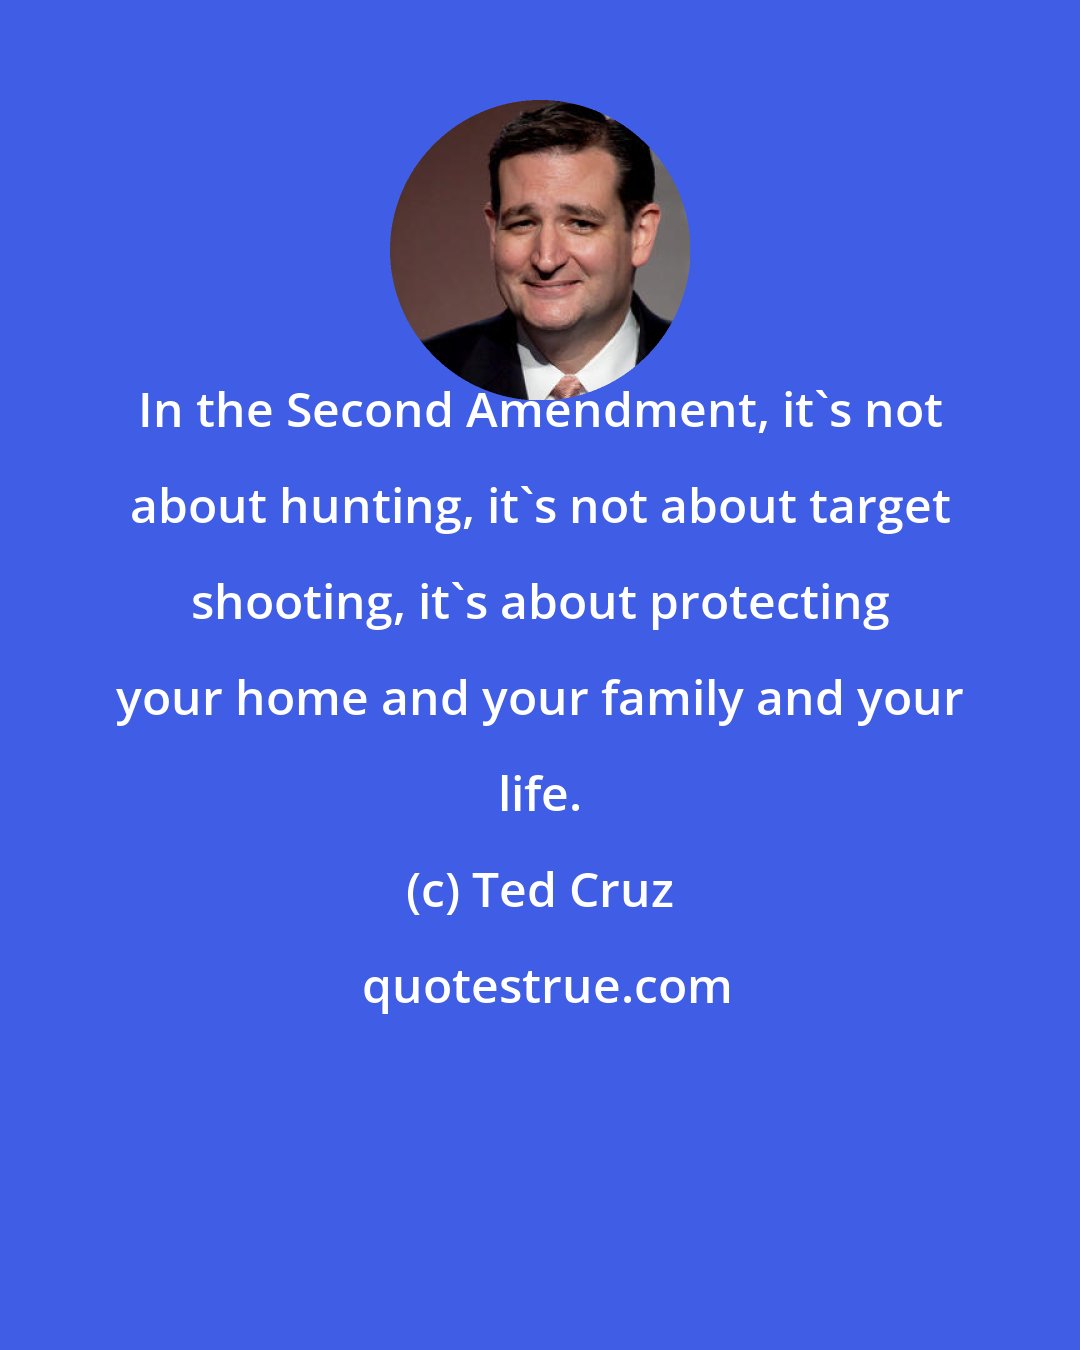 Ted Cruz: In the Second Amendment, it's not about hunting, it's not about target shooting, it's about protecting your home and your family and your life.